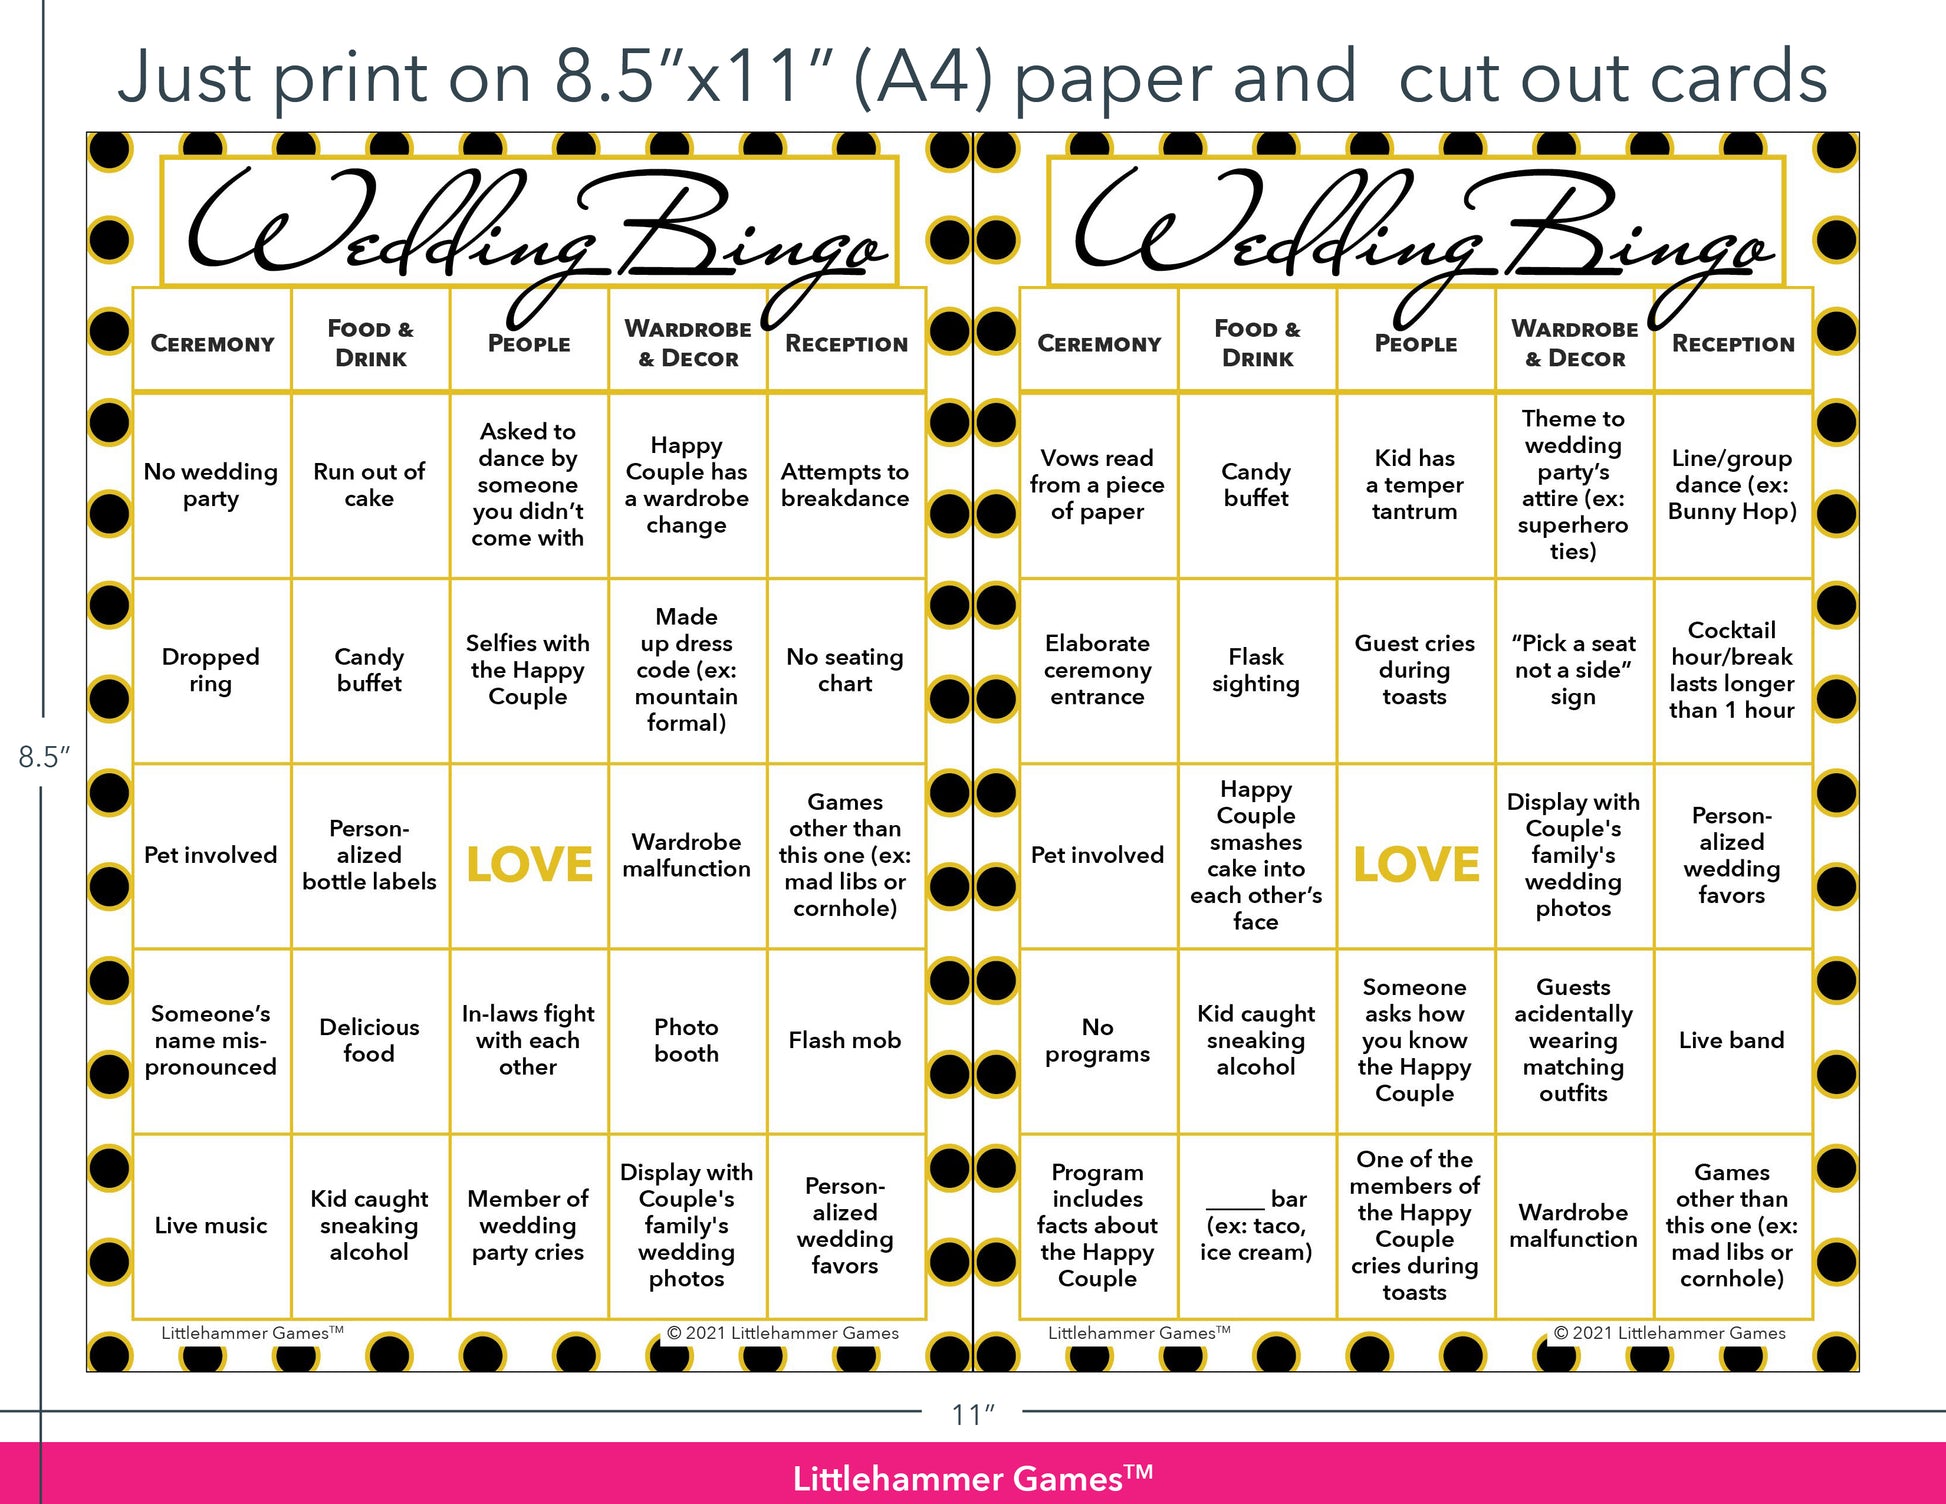 Black and gold polka dot Wedding Bingo game cards with printing instructions